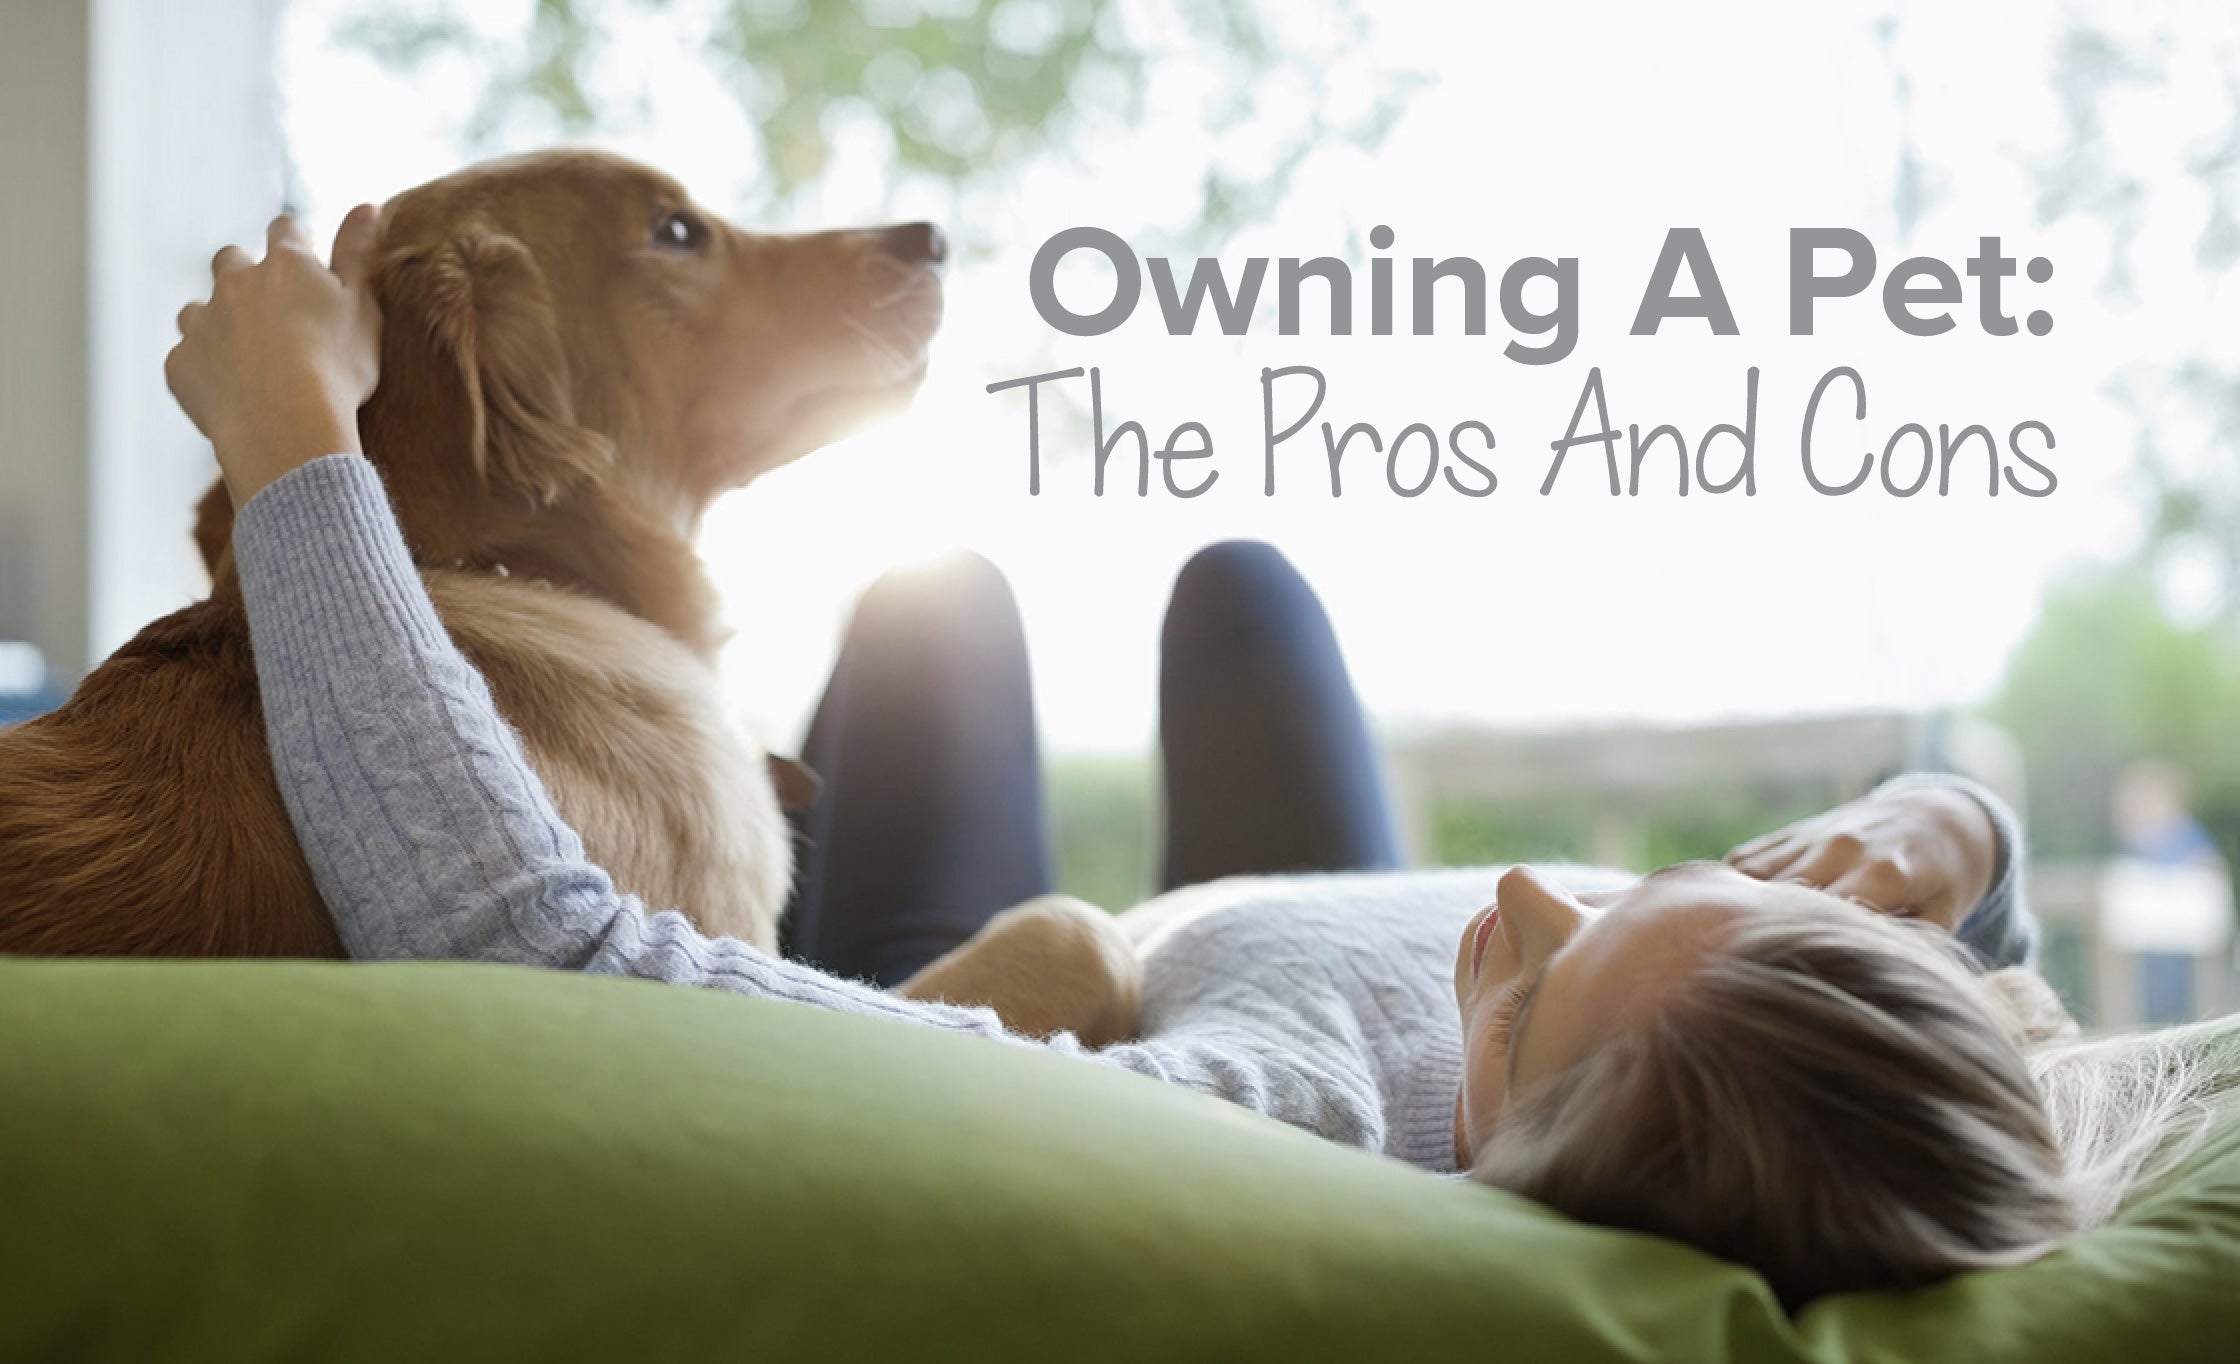 Owning A Pet: The Pros And Cons